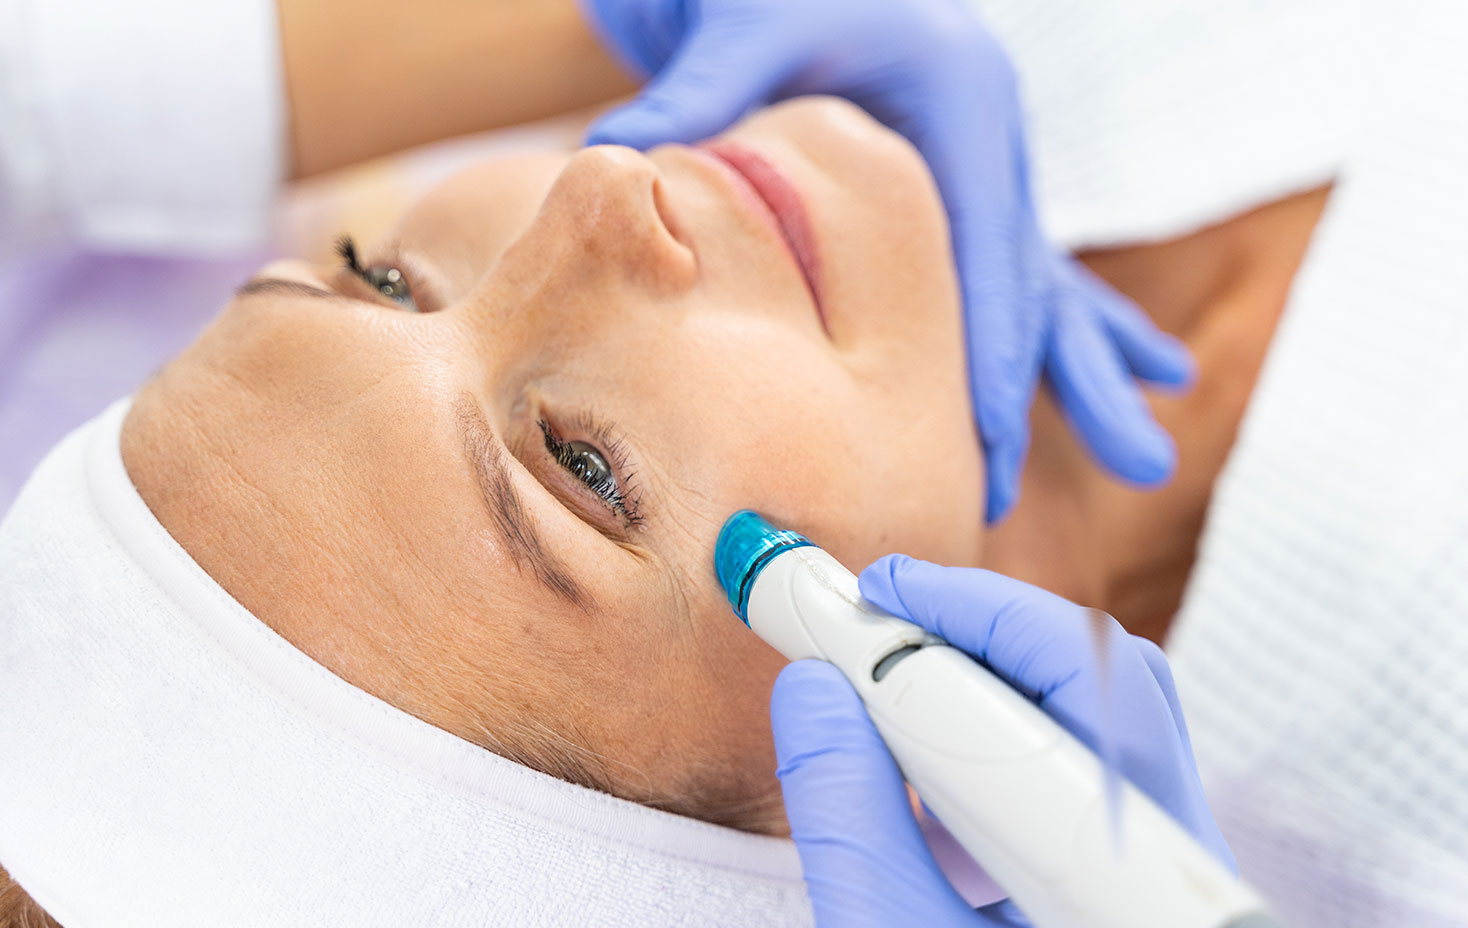 Luxurious Microdermabrasion Treatment | Hello Laser: Reveal Radiant, Youthful Skin.